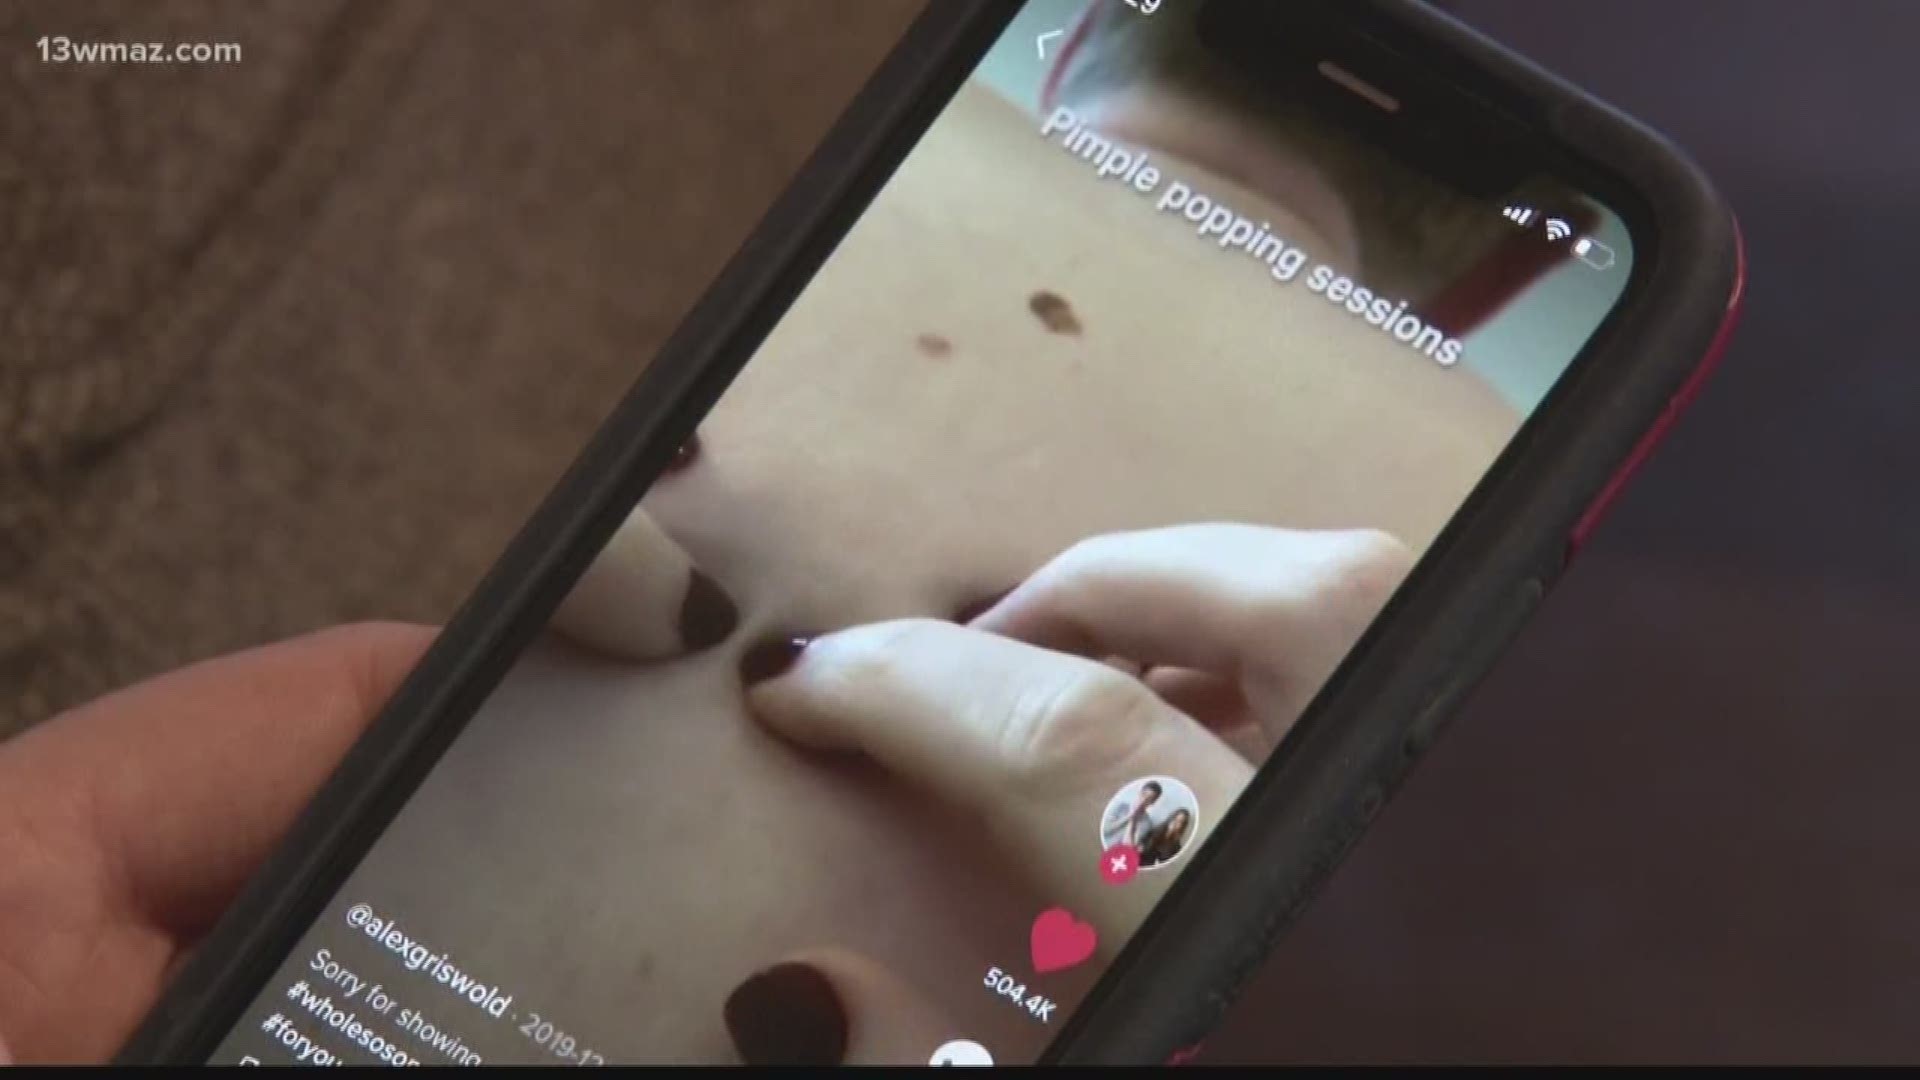 A Macon woman saved a stranger's life after seeing a video on a social media app. Lizzie Wells talks about how the video showed signs of cancer.